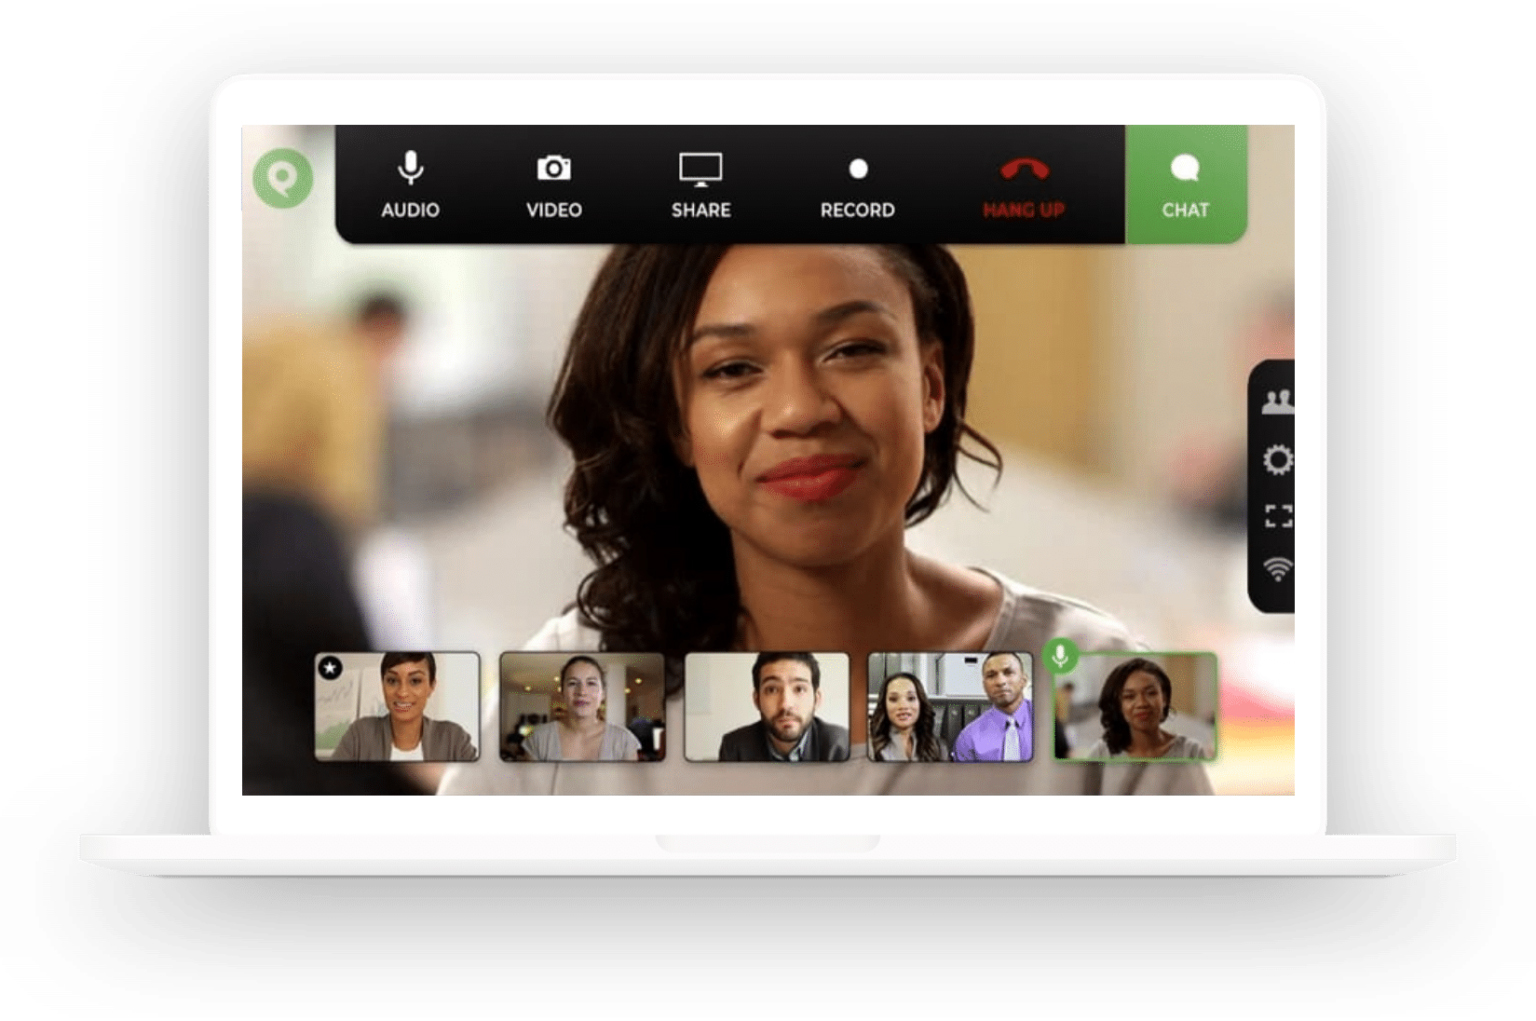 Sample Phone.com video conferencing session with multiple participants and meeting control options.